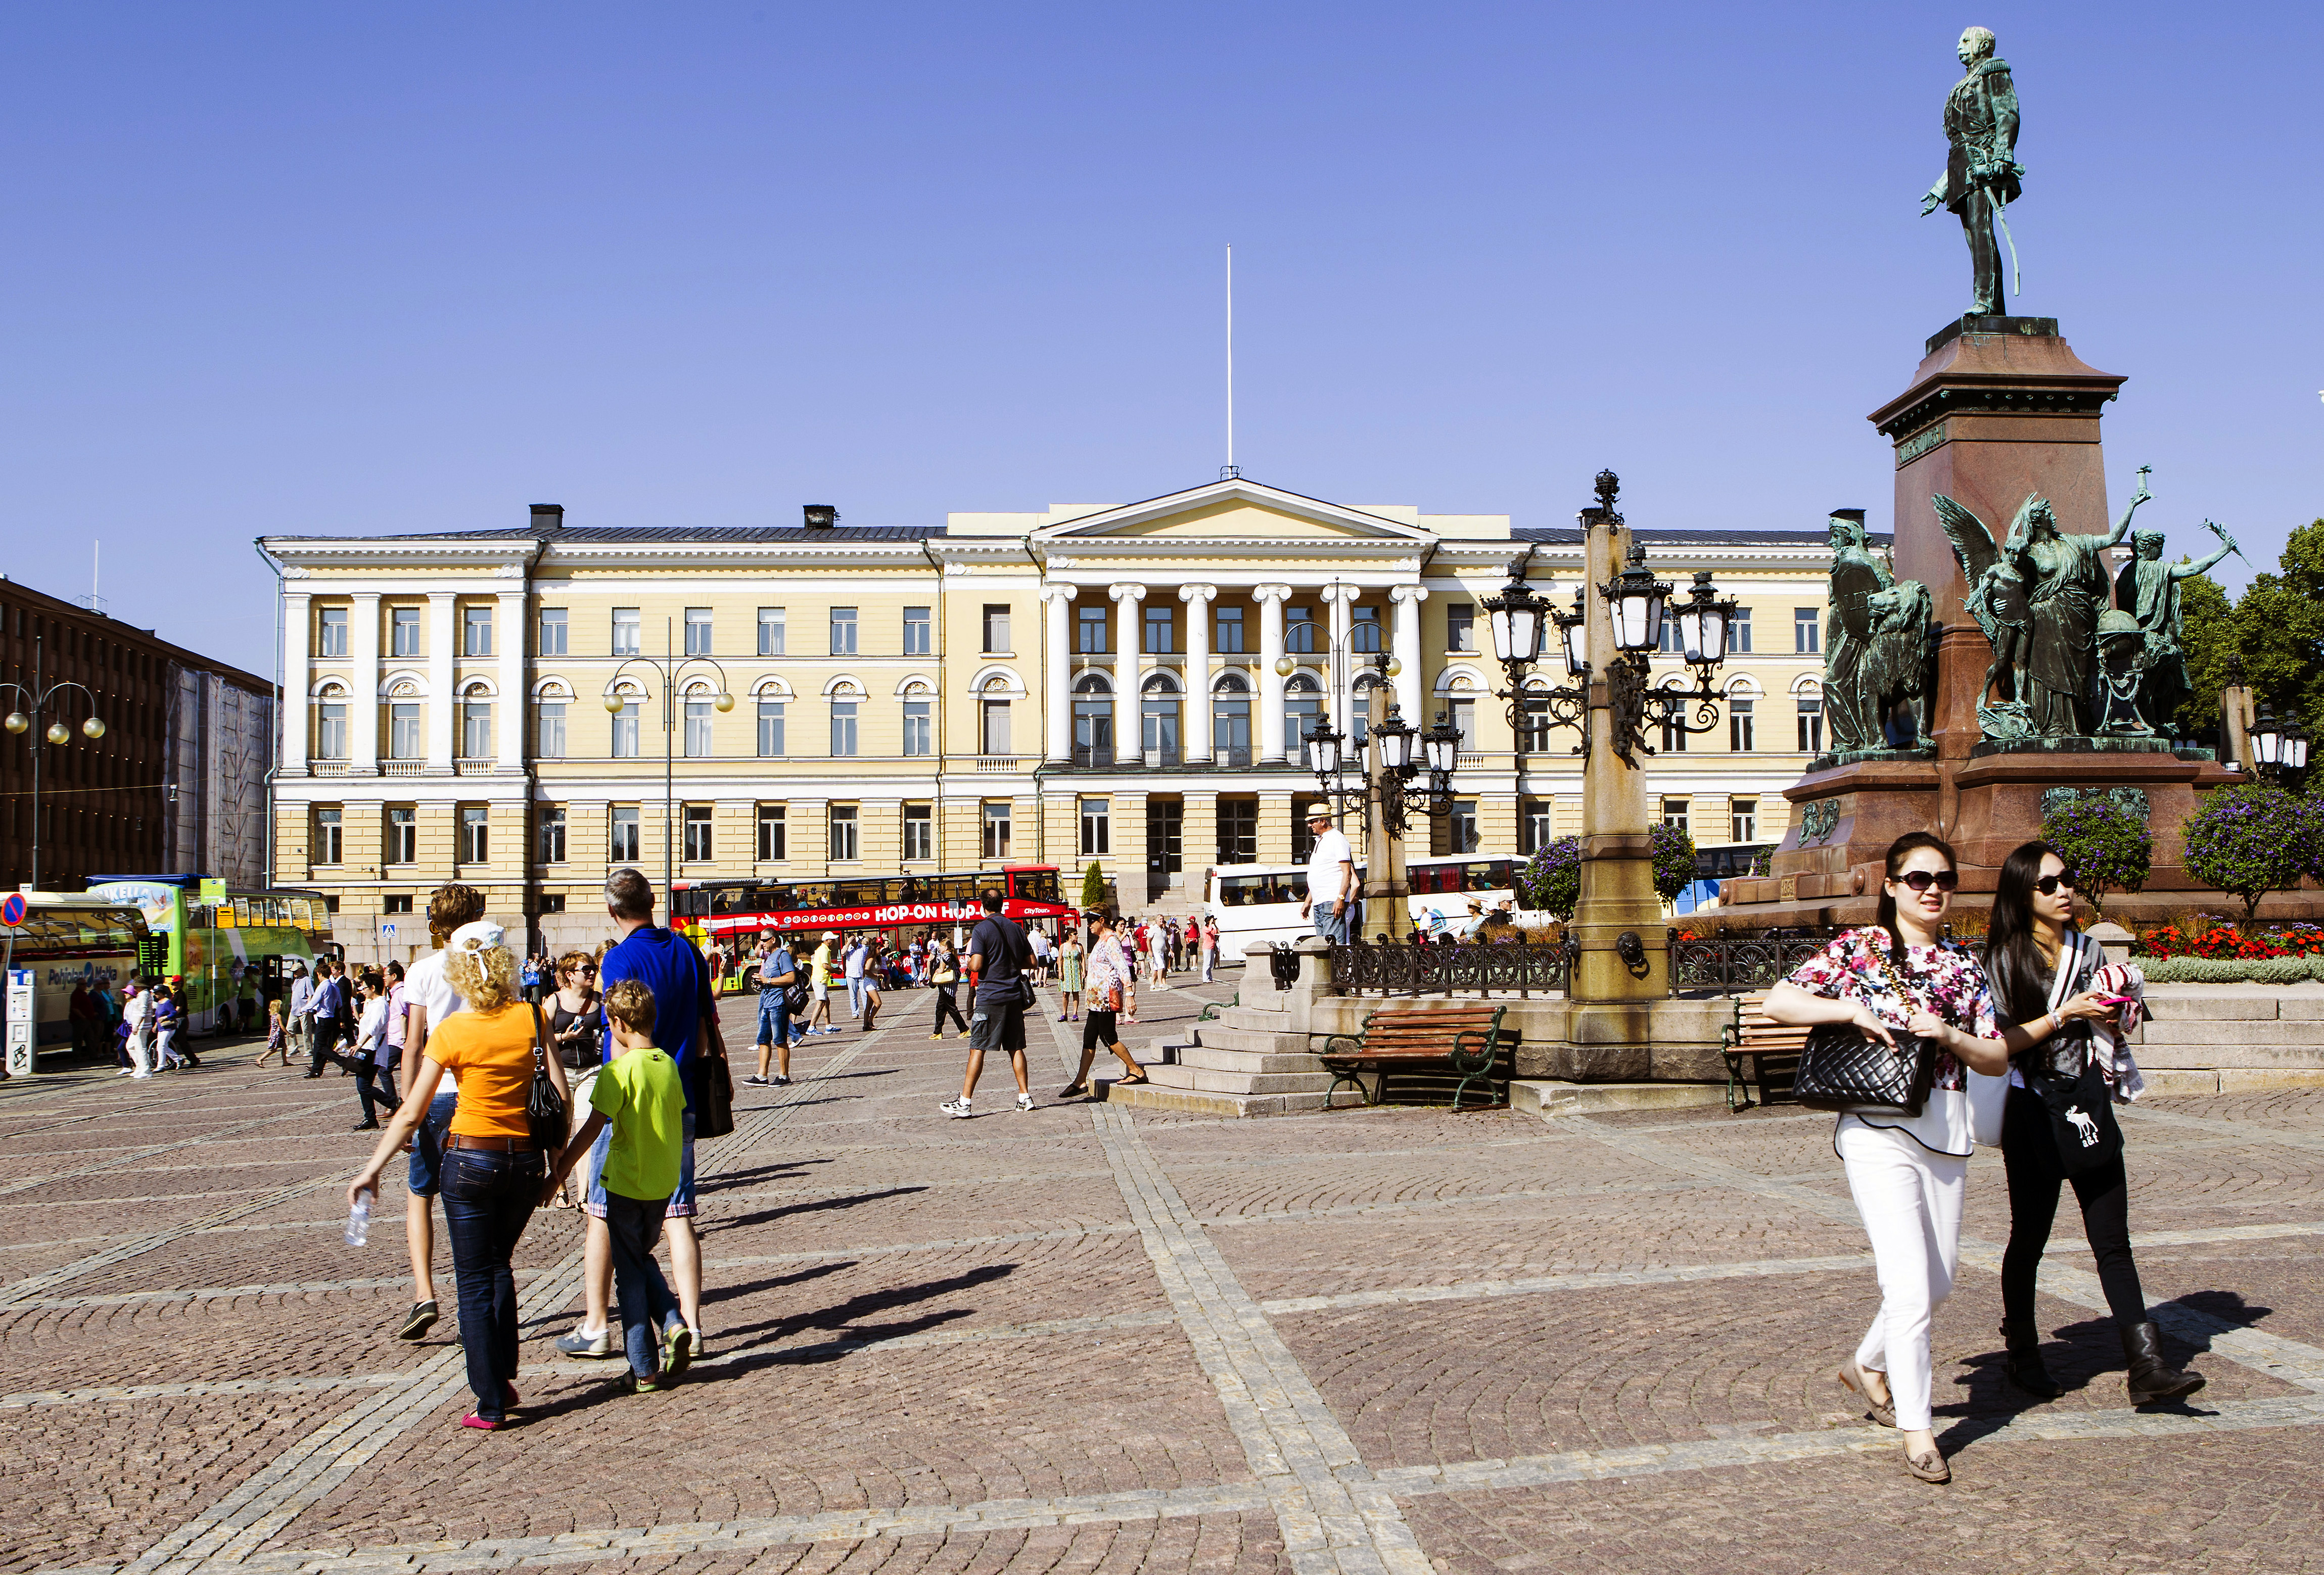 Studying in Finland: Amendment to student resident permit announced